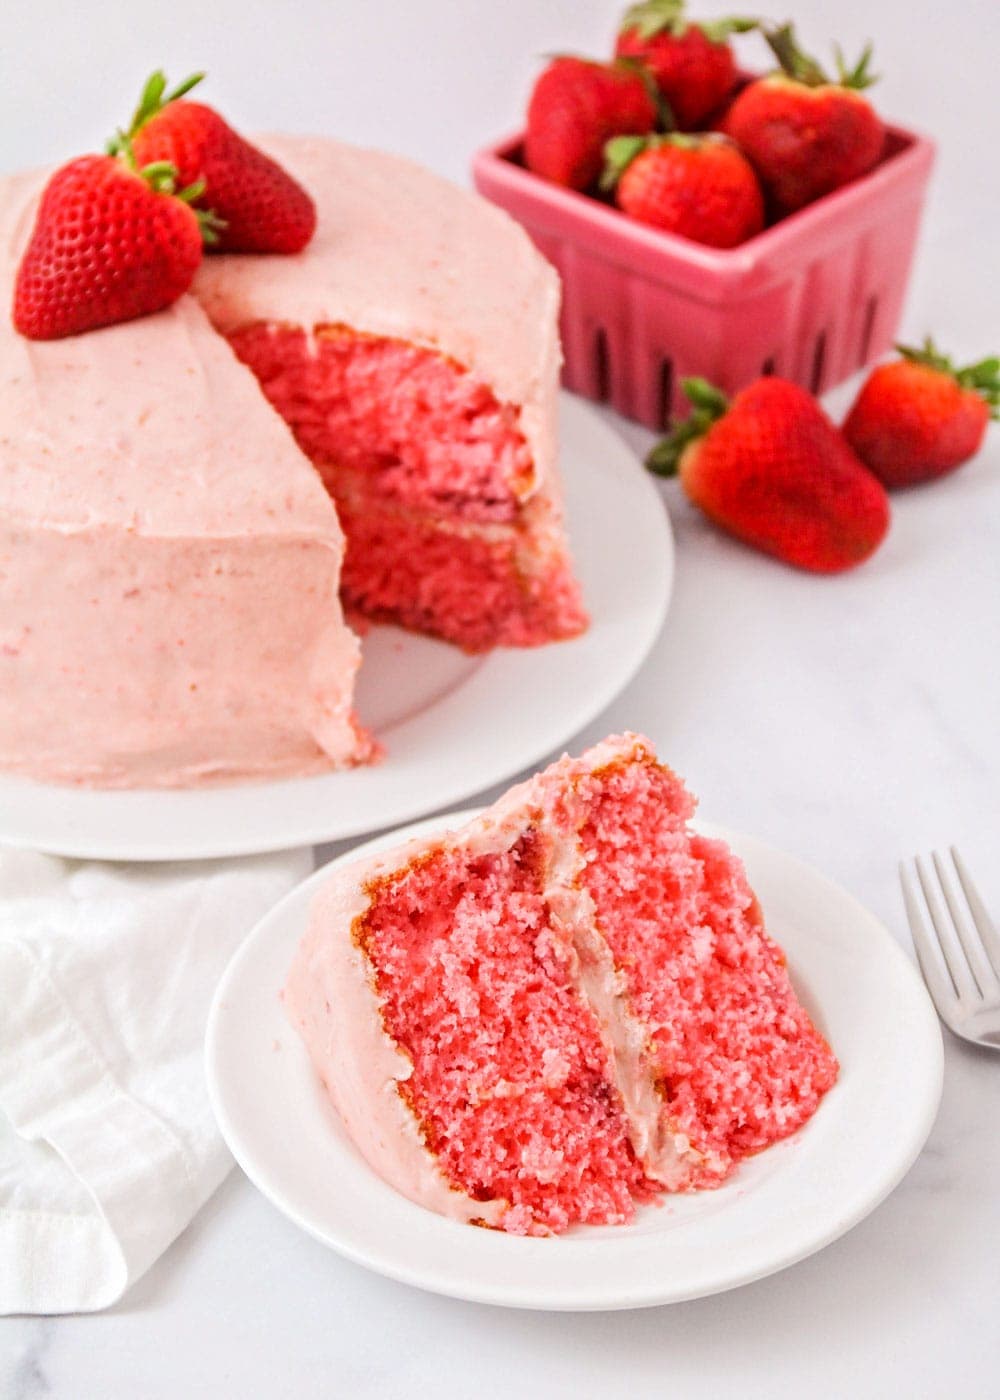 A slice of homemade strawberry cake on a white plate.